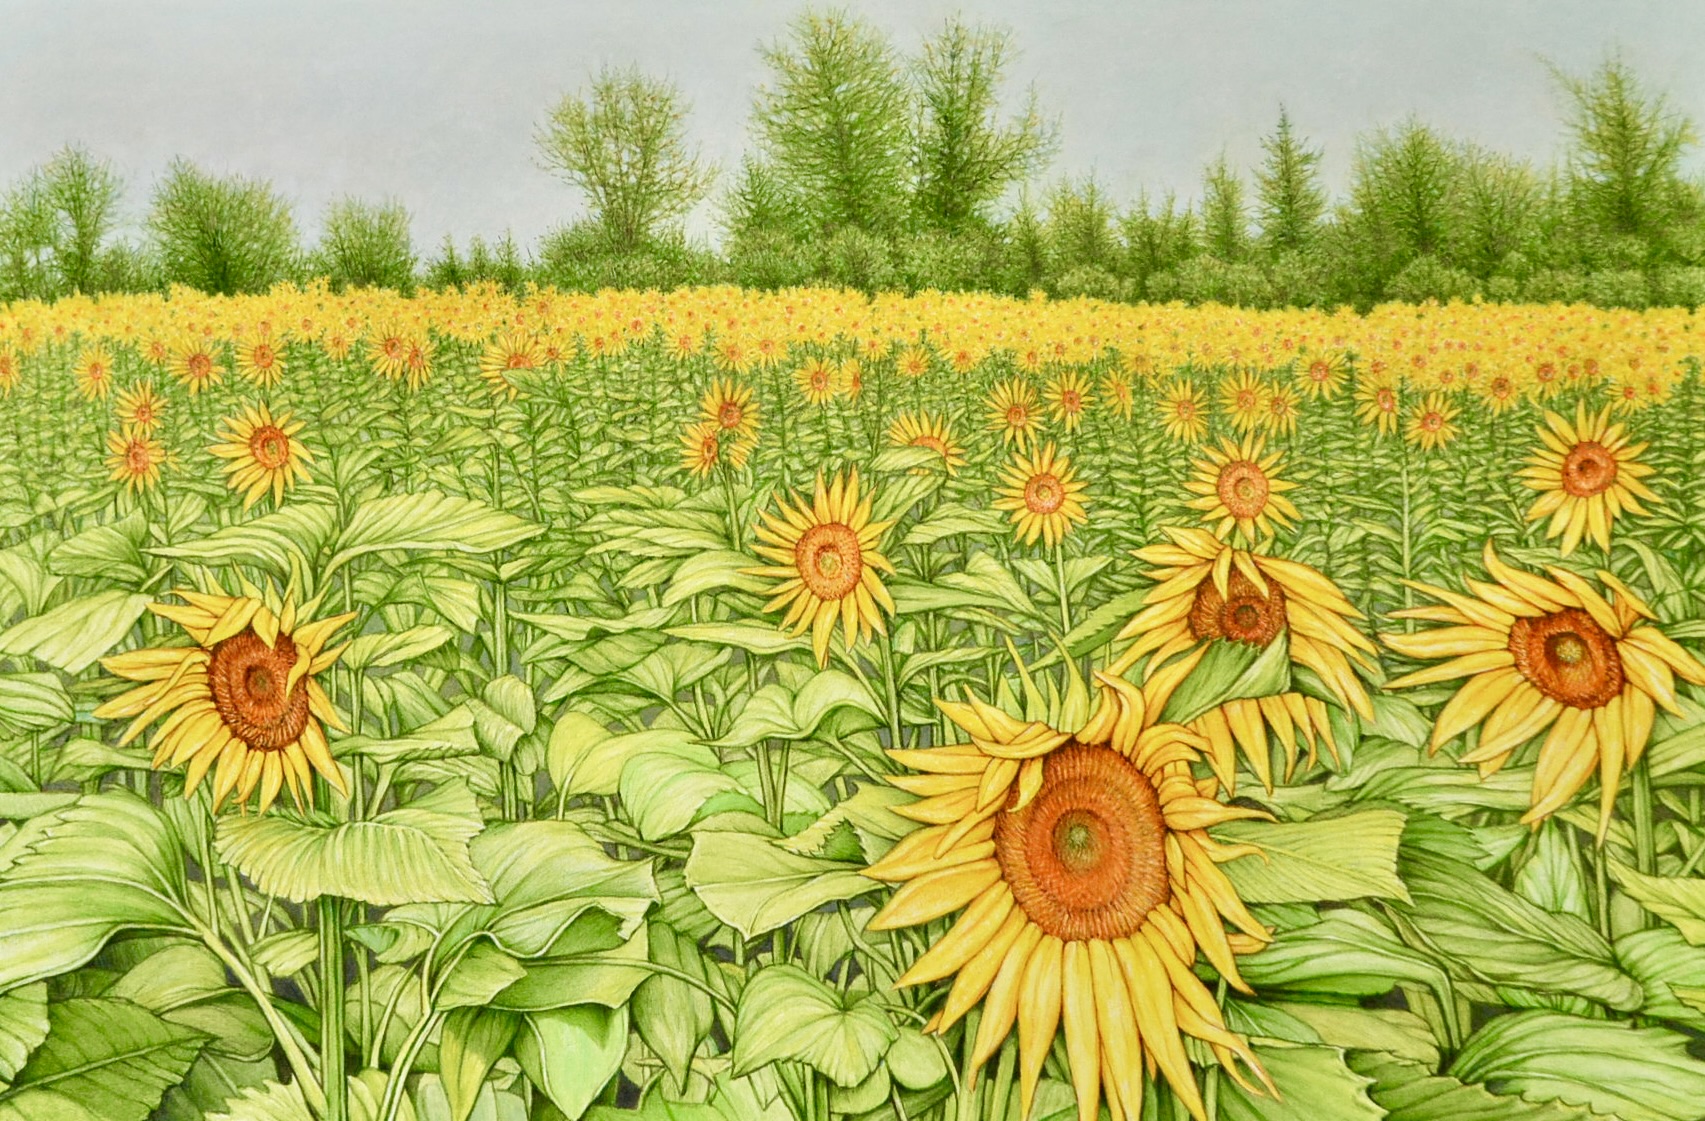 SUNFLOWERS 4, 24 x 36 inches, oil on canvas,